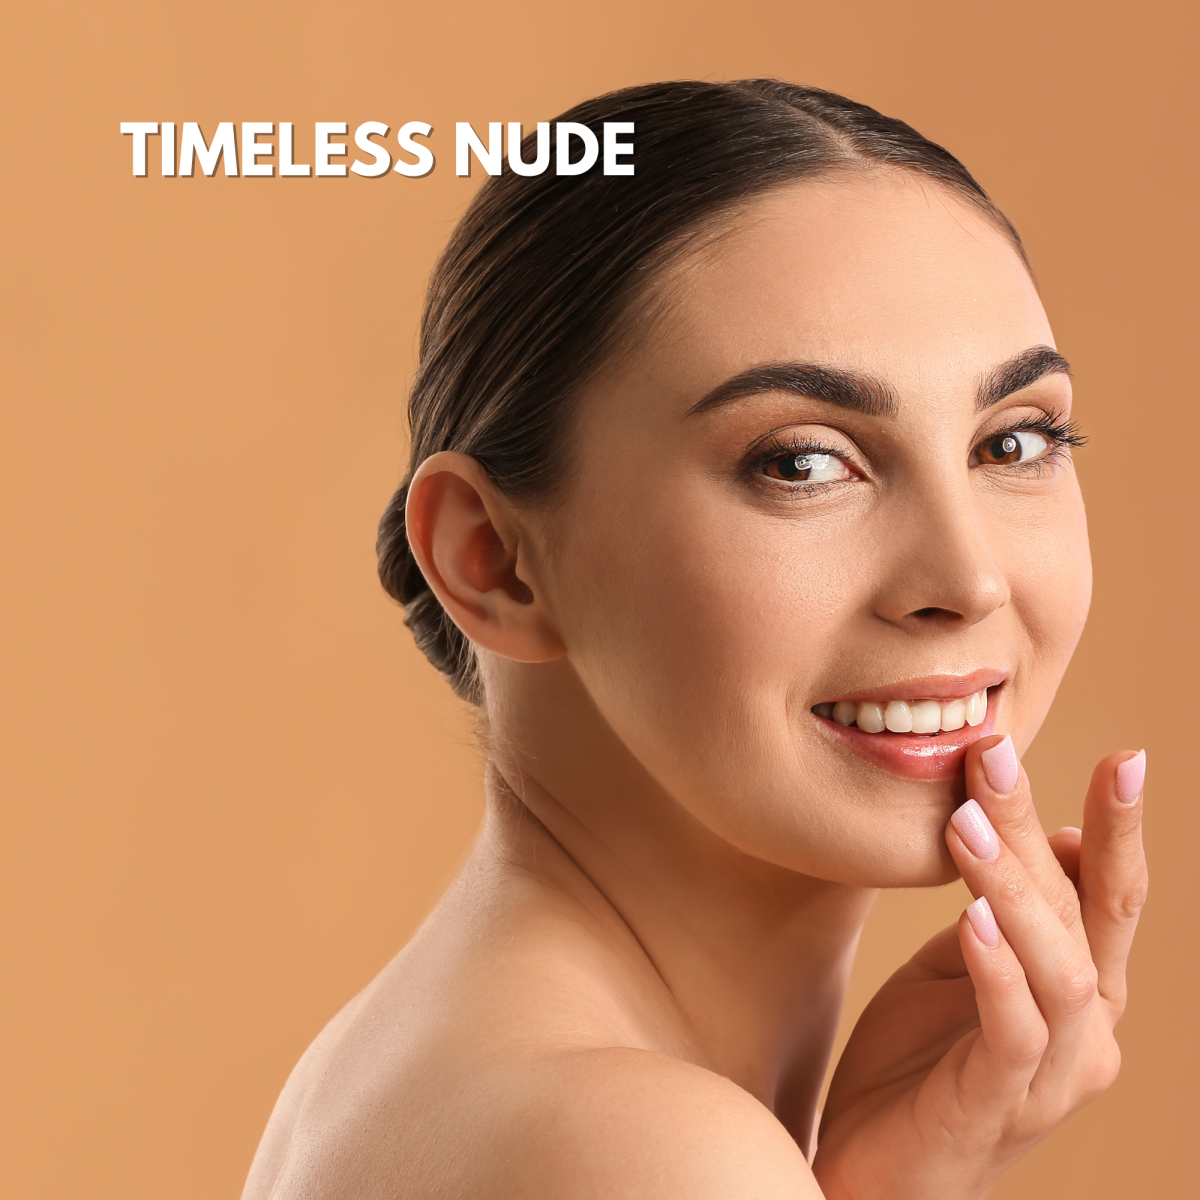 TIMELESS NUDE